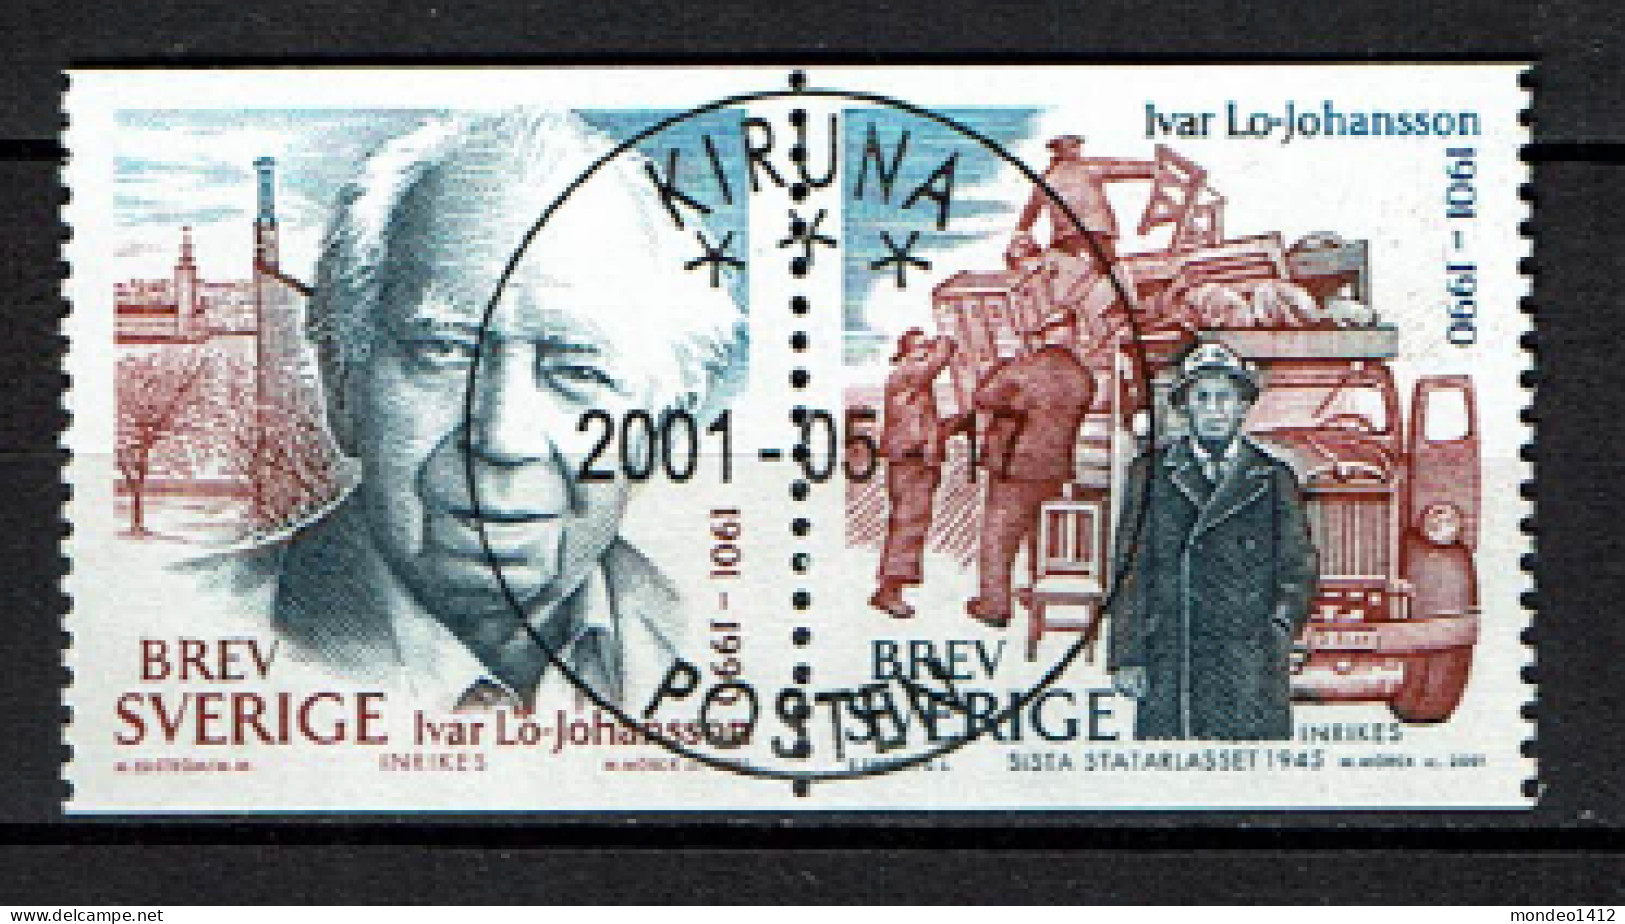 Sweden 2001 - Anniversary Of The Birth Of Ivar Lo-Johansson, Swedish Writer Of The Proletarian School - Used - Used Stamps